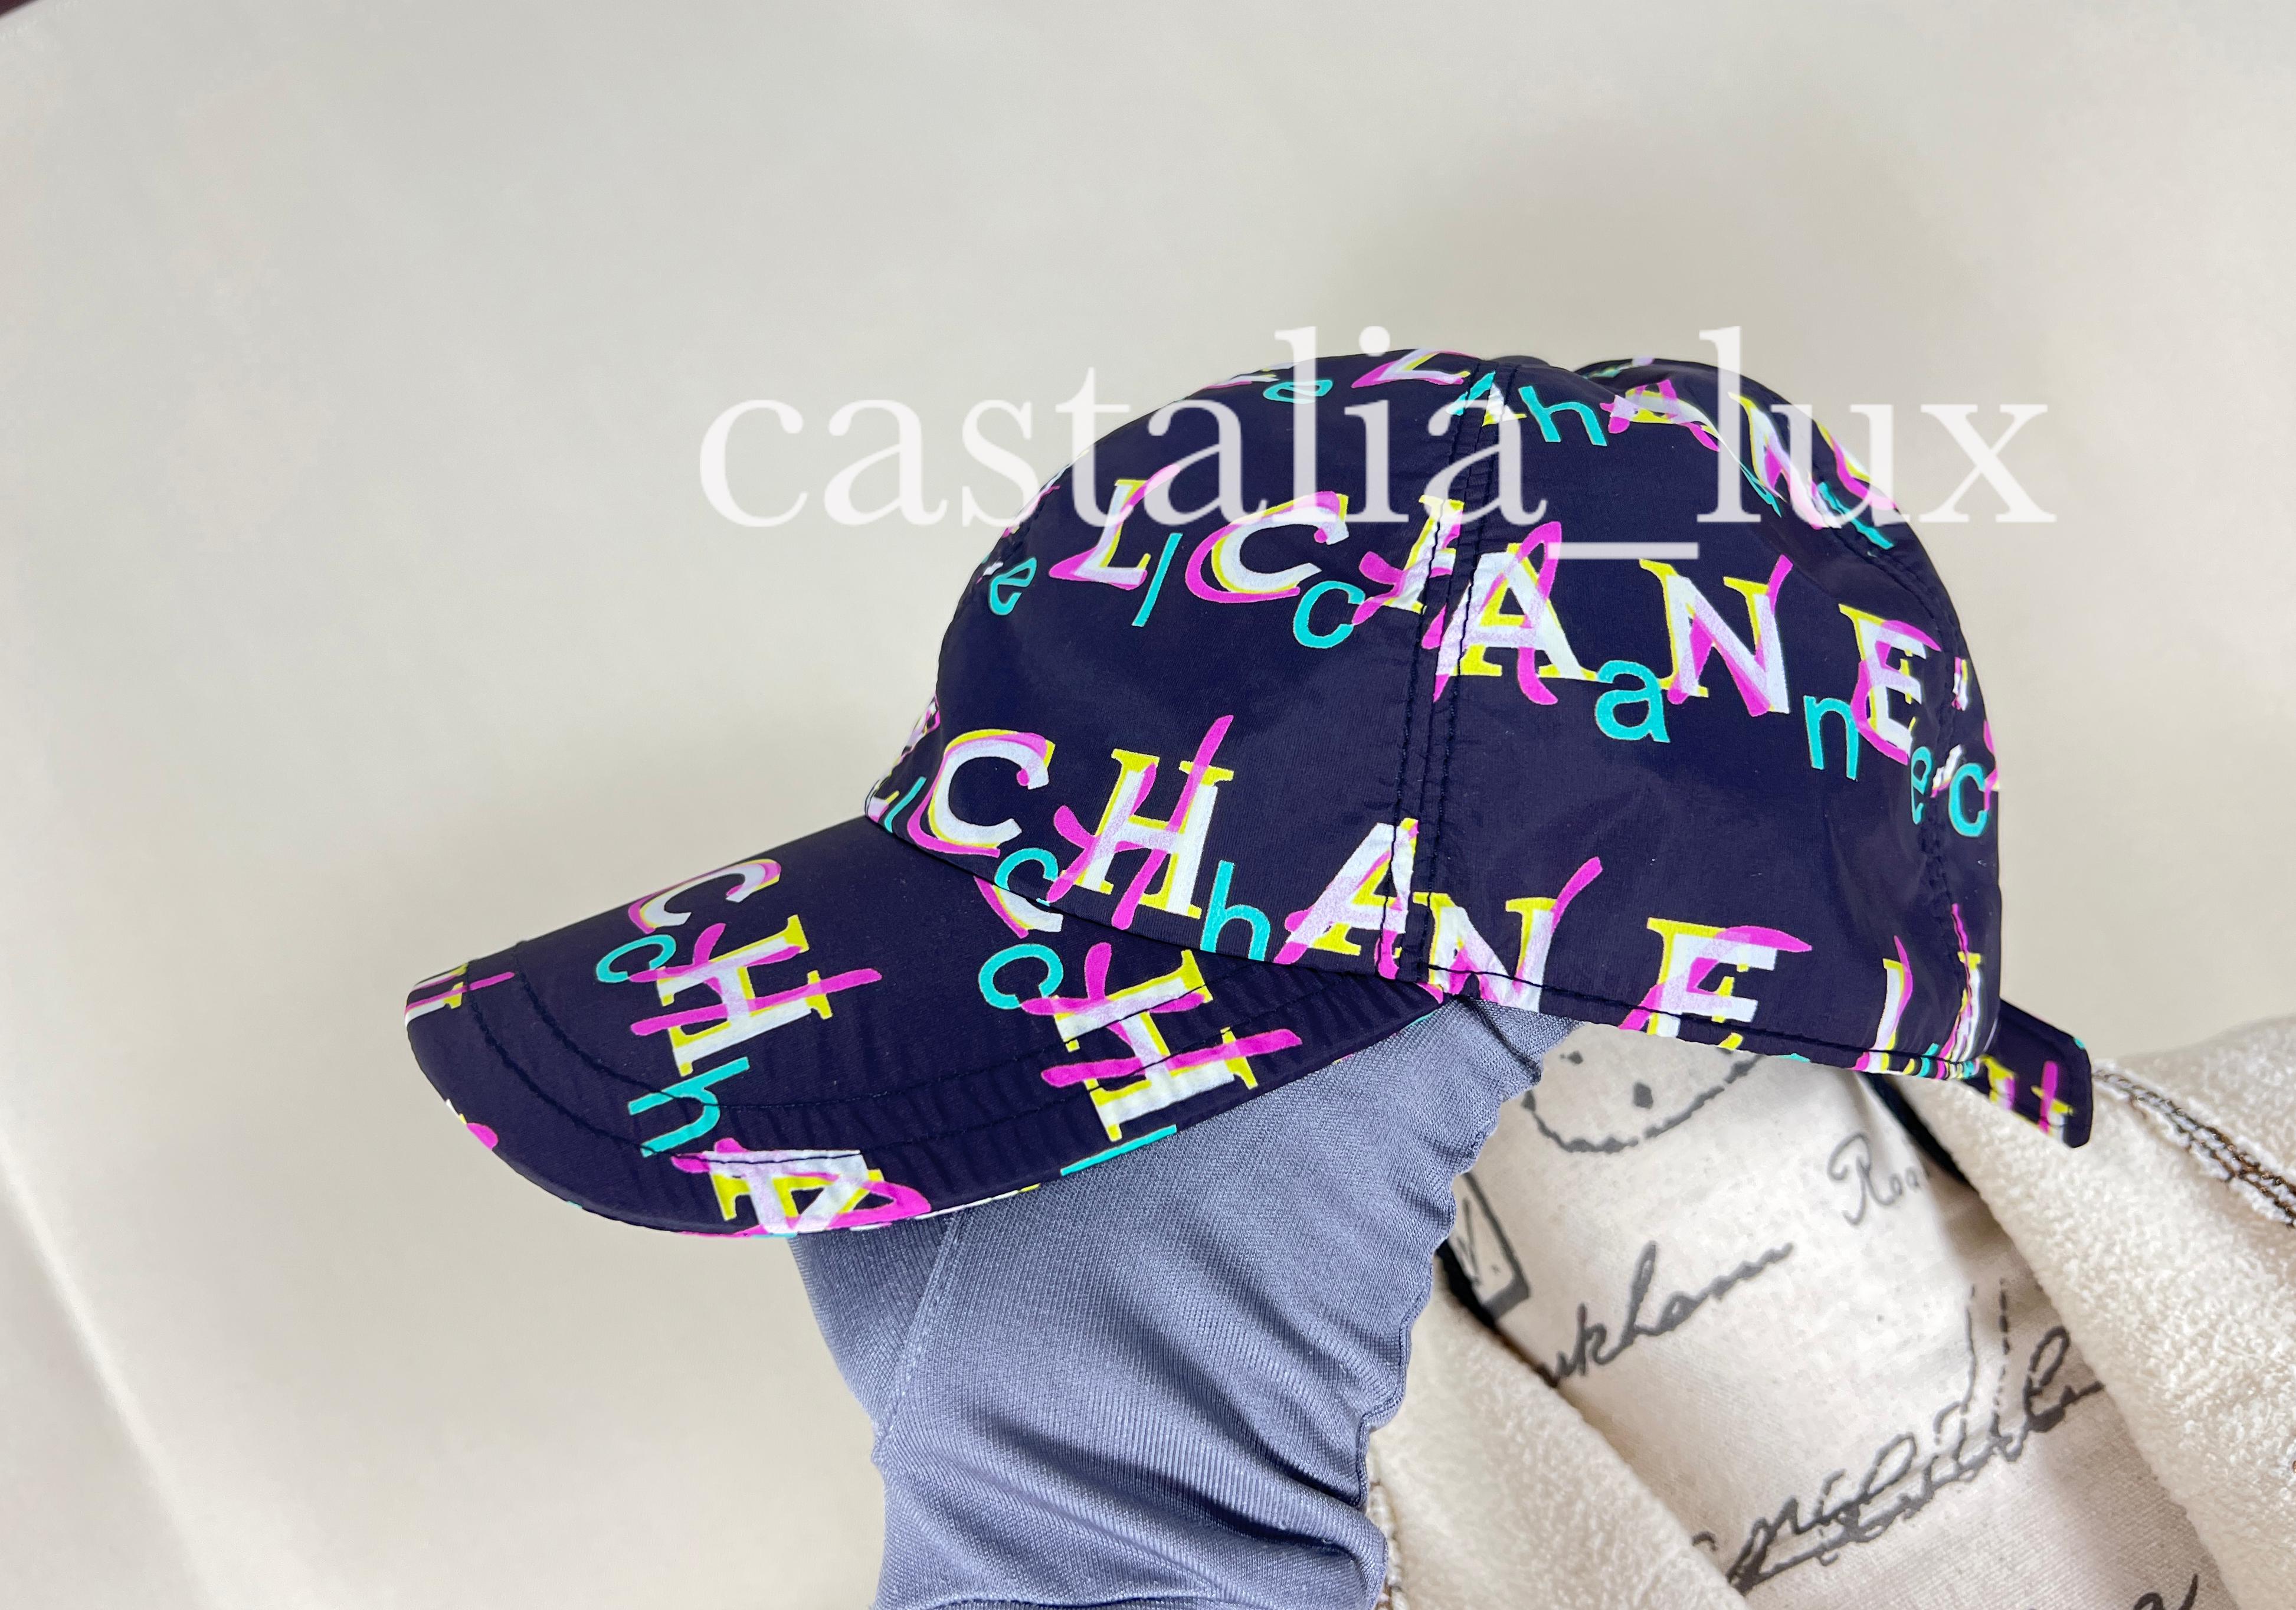 New Chanel black logo Graffiti cap from 2019 Spring Collection.
Size: ONE size, universal
Condition: never worn.